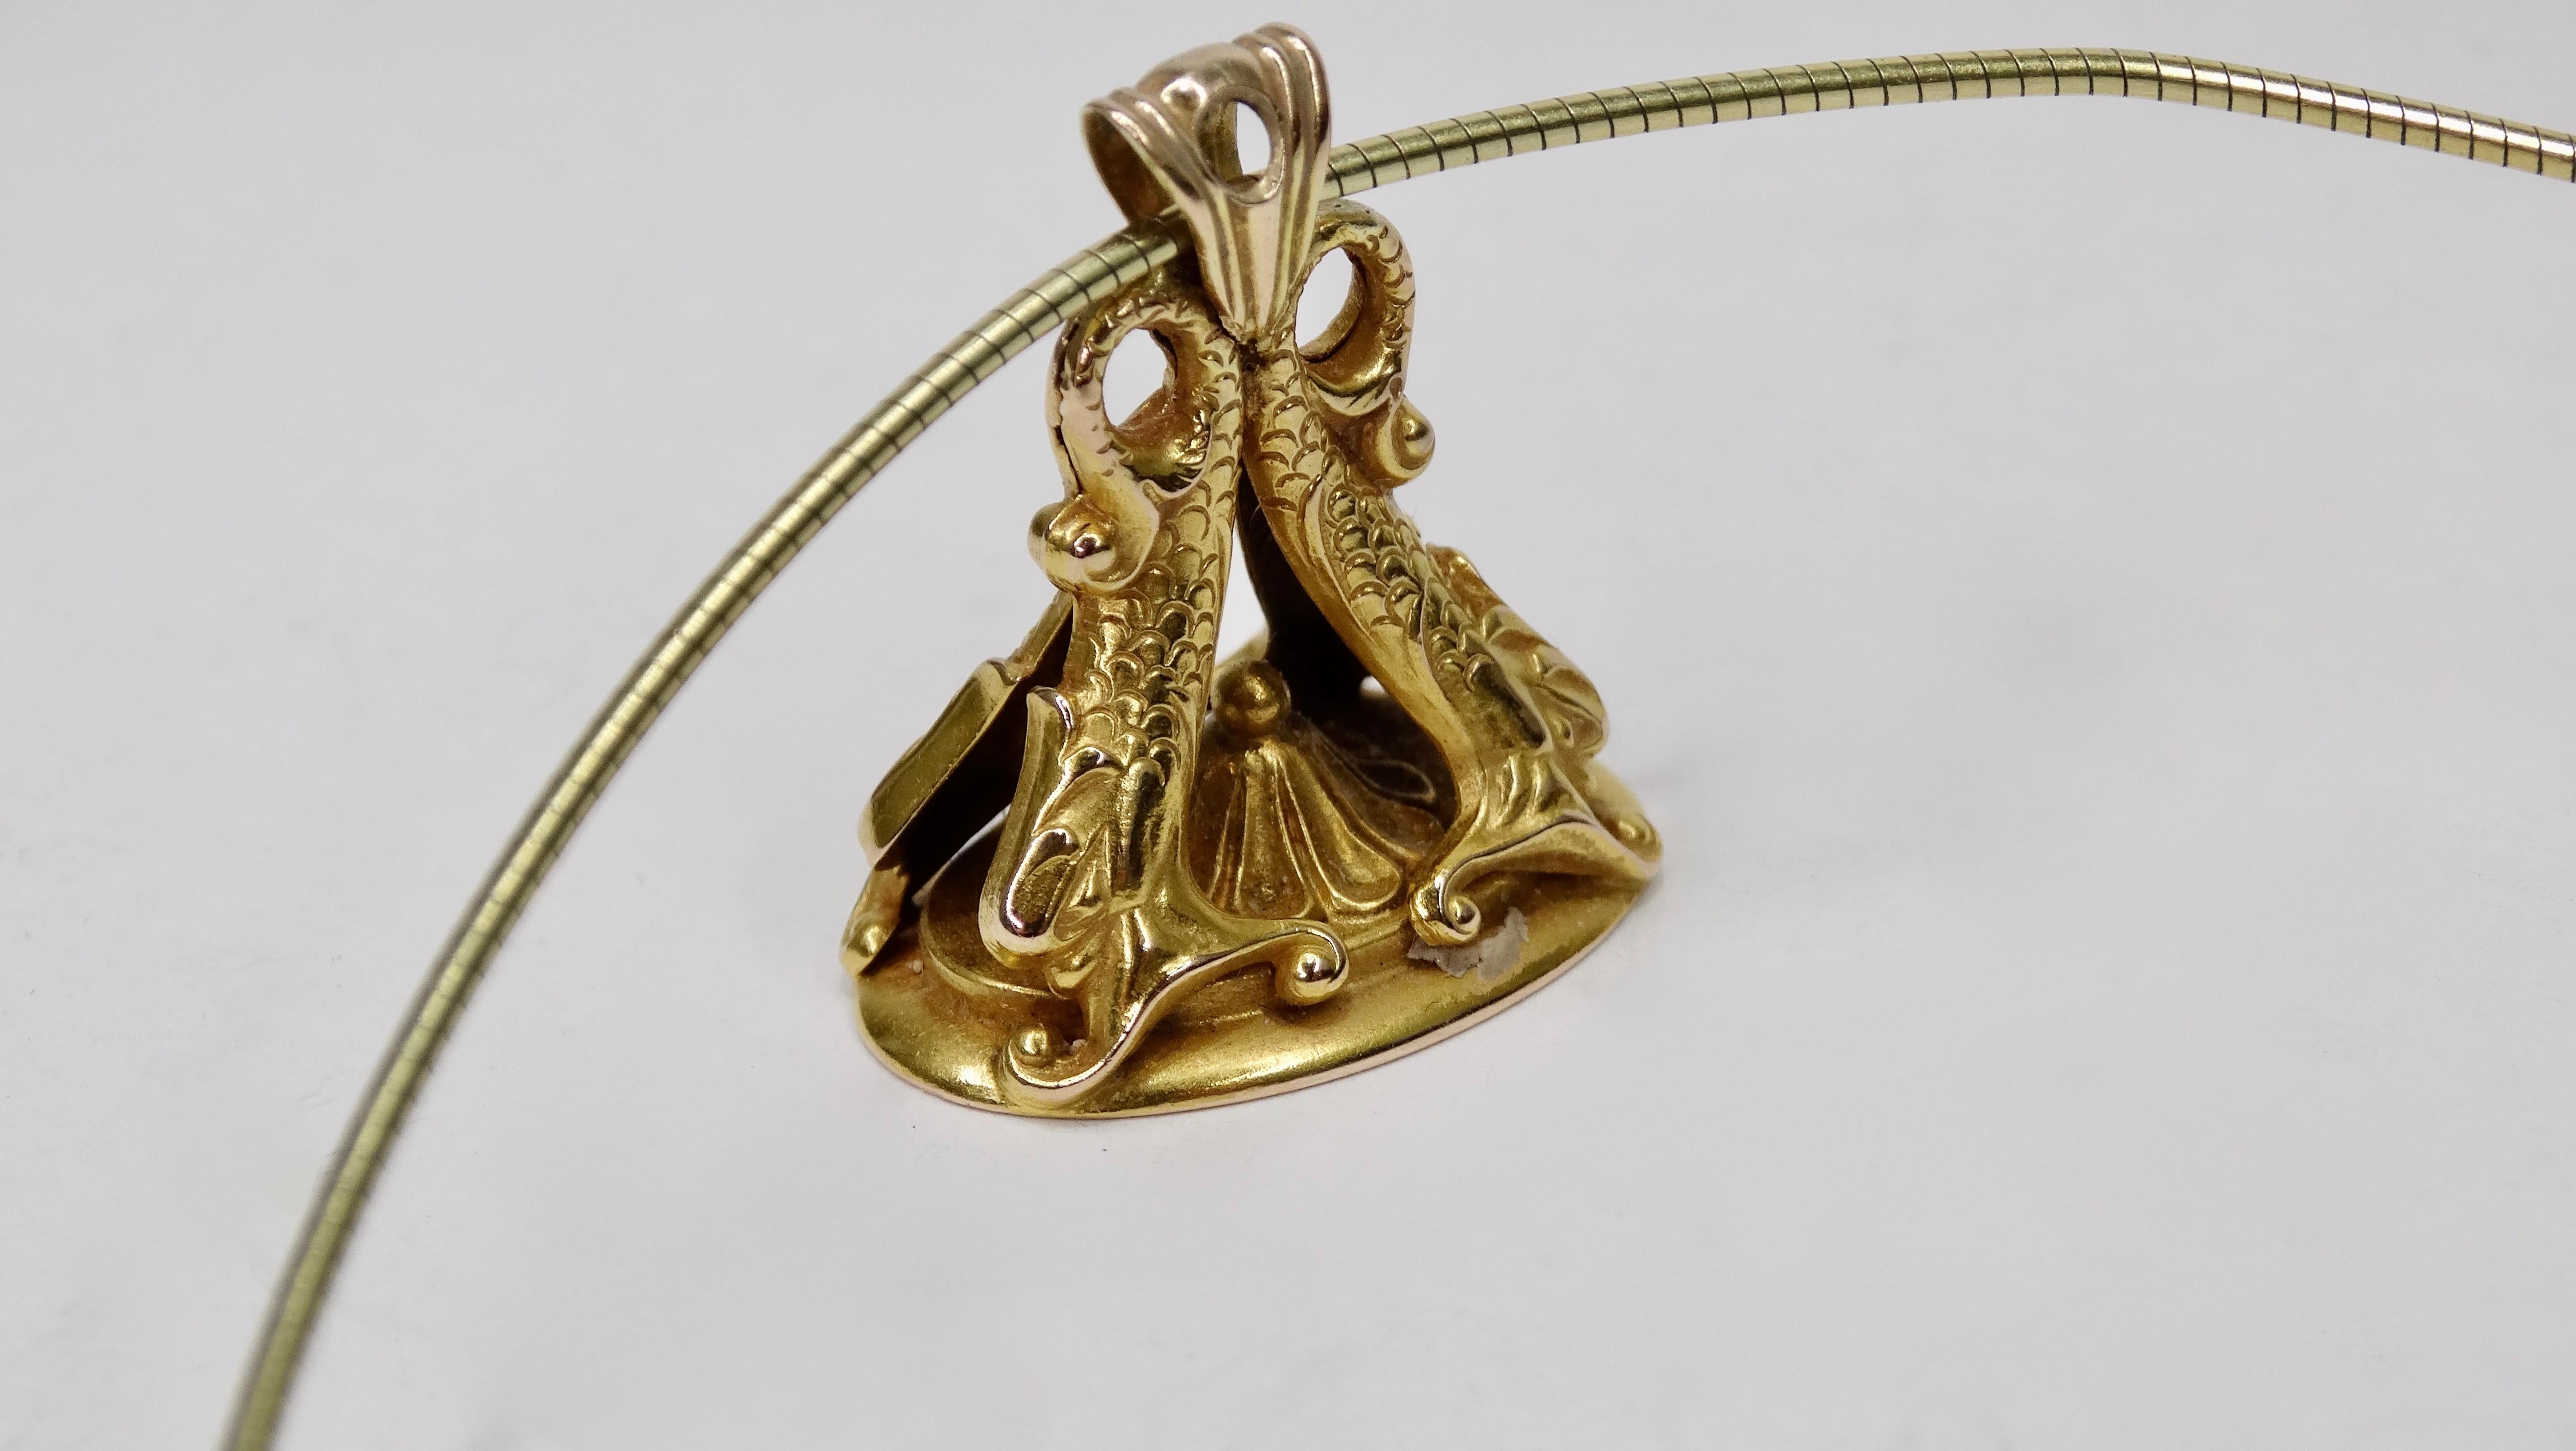 Beautiful 14k Gold Italian made chain with a Victorian era Koi fish intaglio gold seal fob pendant. These fobs were historically handcrafted in England during the Early Victorian Era, around 1850. The seal fobs would have been used to stamp wax to